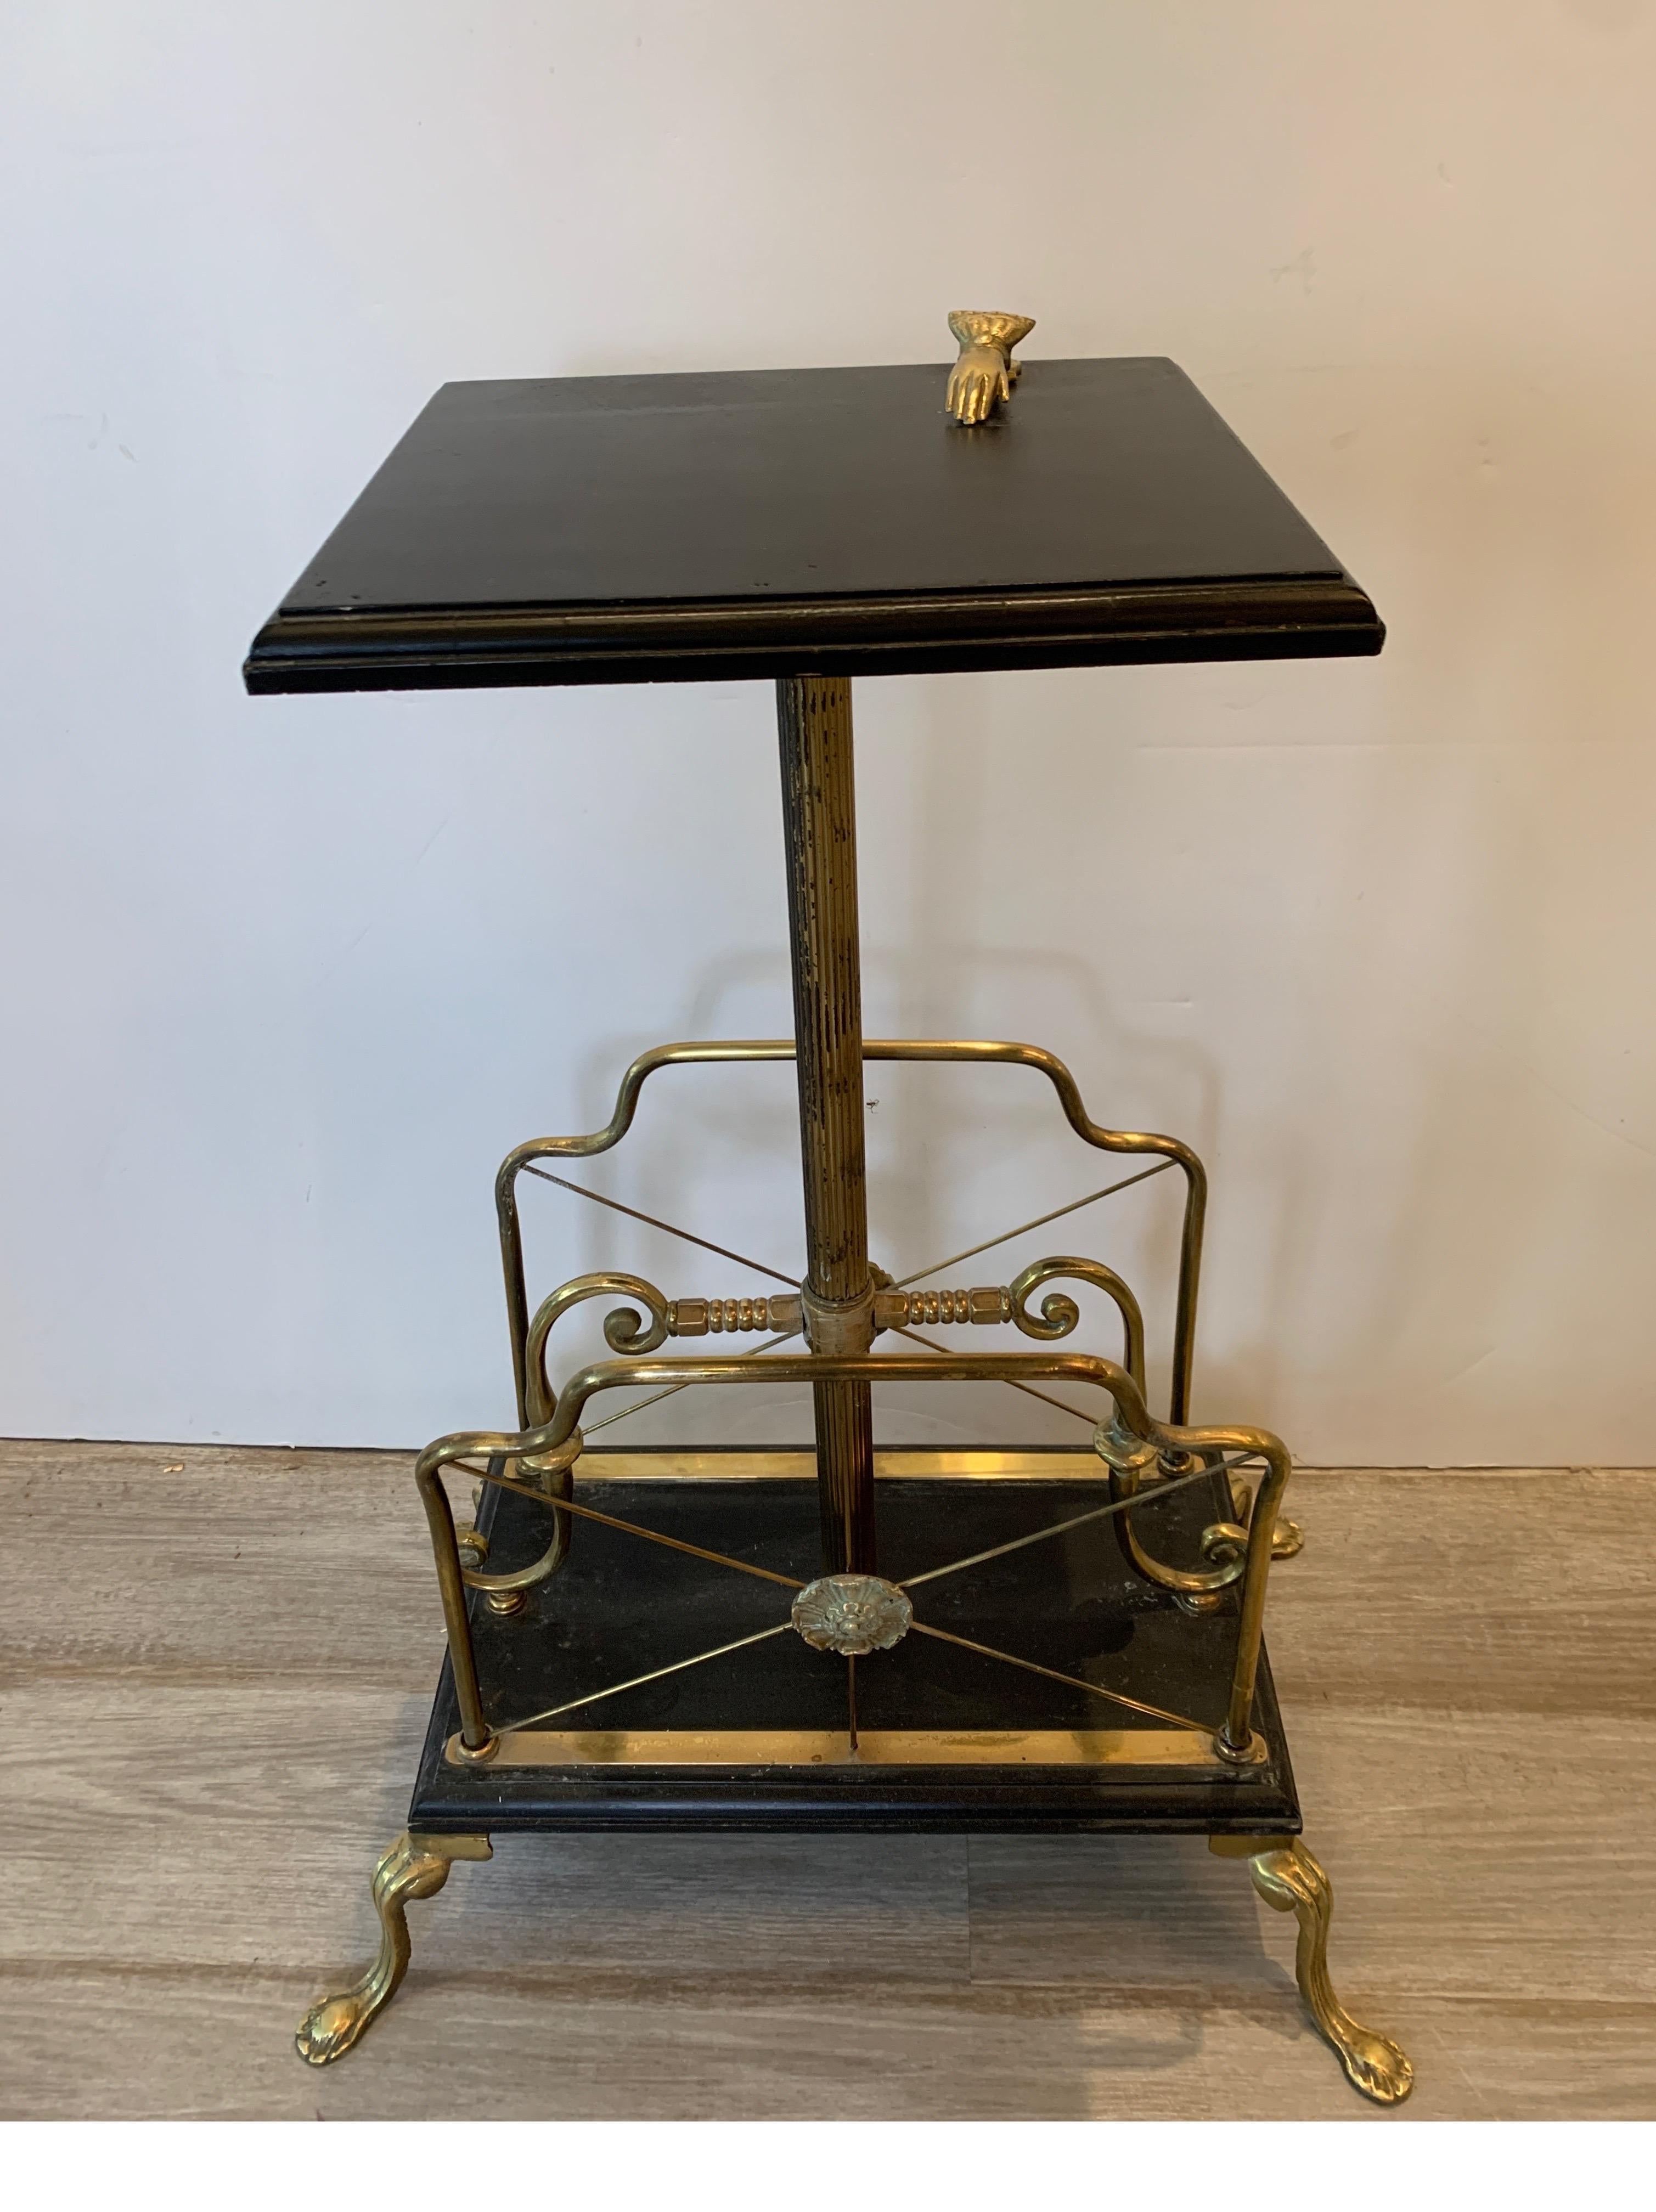 Charming Victorian magazine stand or music holder. The brass and dark green marble top with an upper table surface with an attached clip to hold things in place. The bottom with two places for storing papers and books.